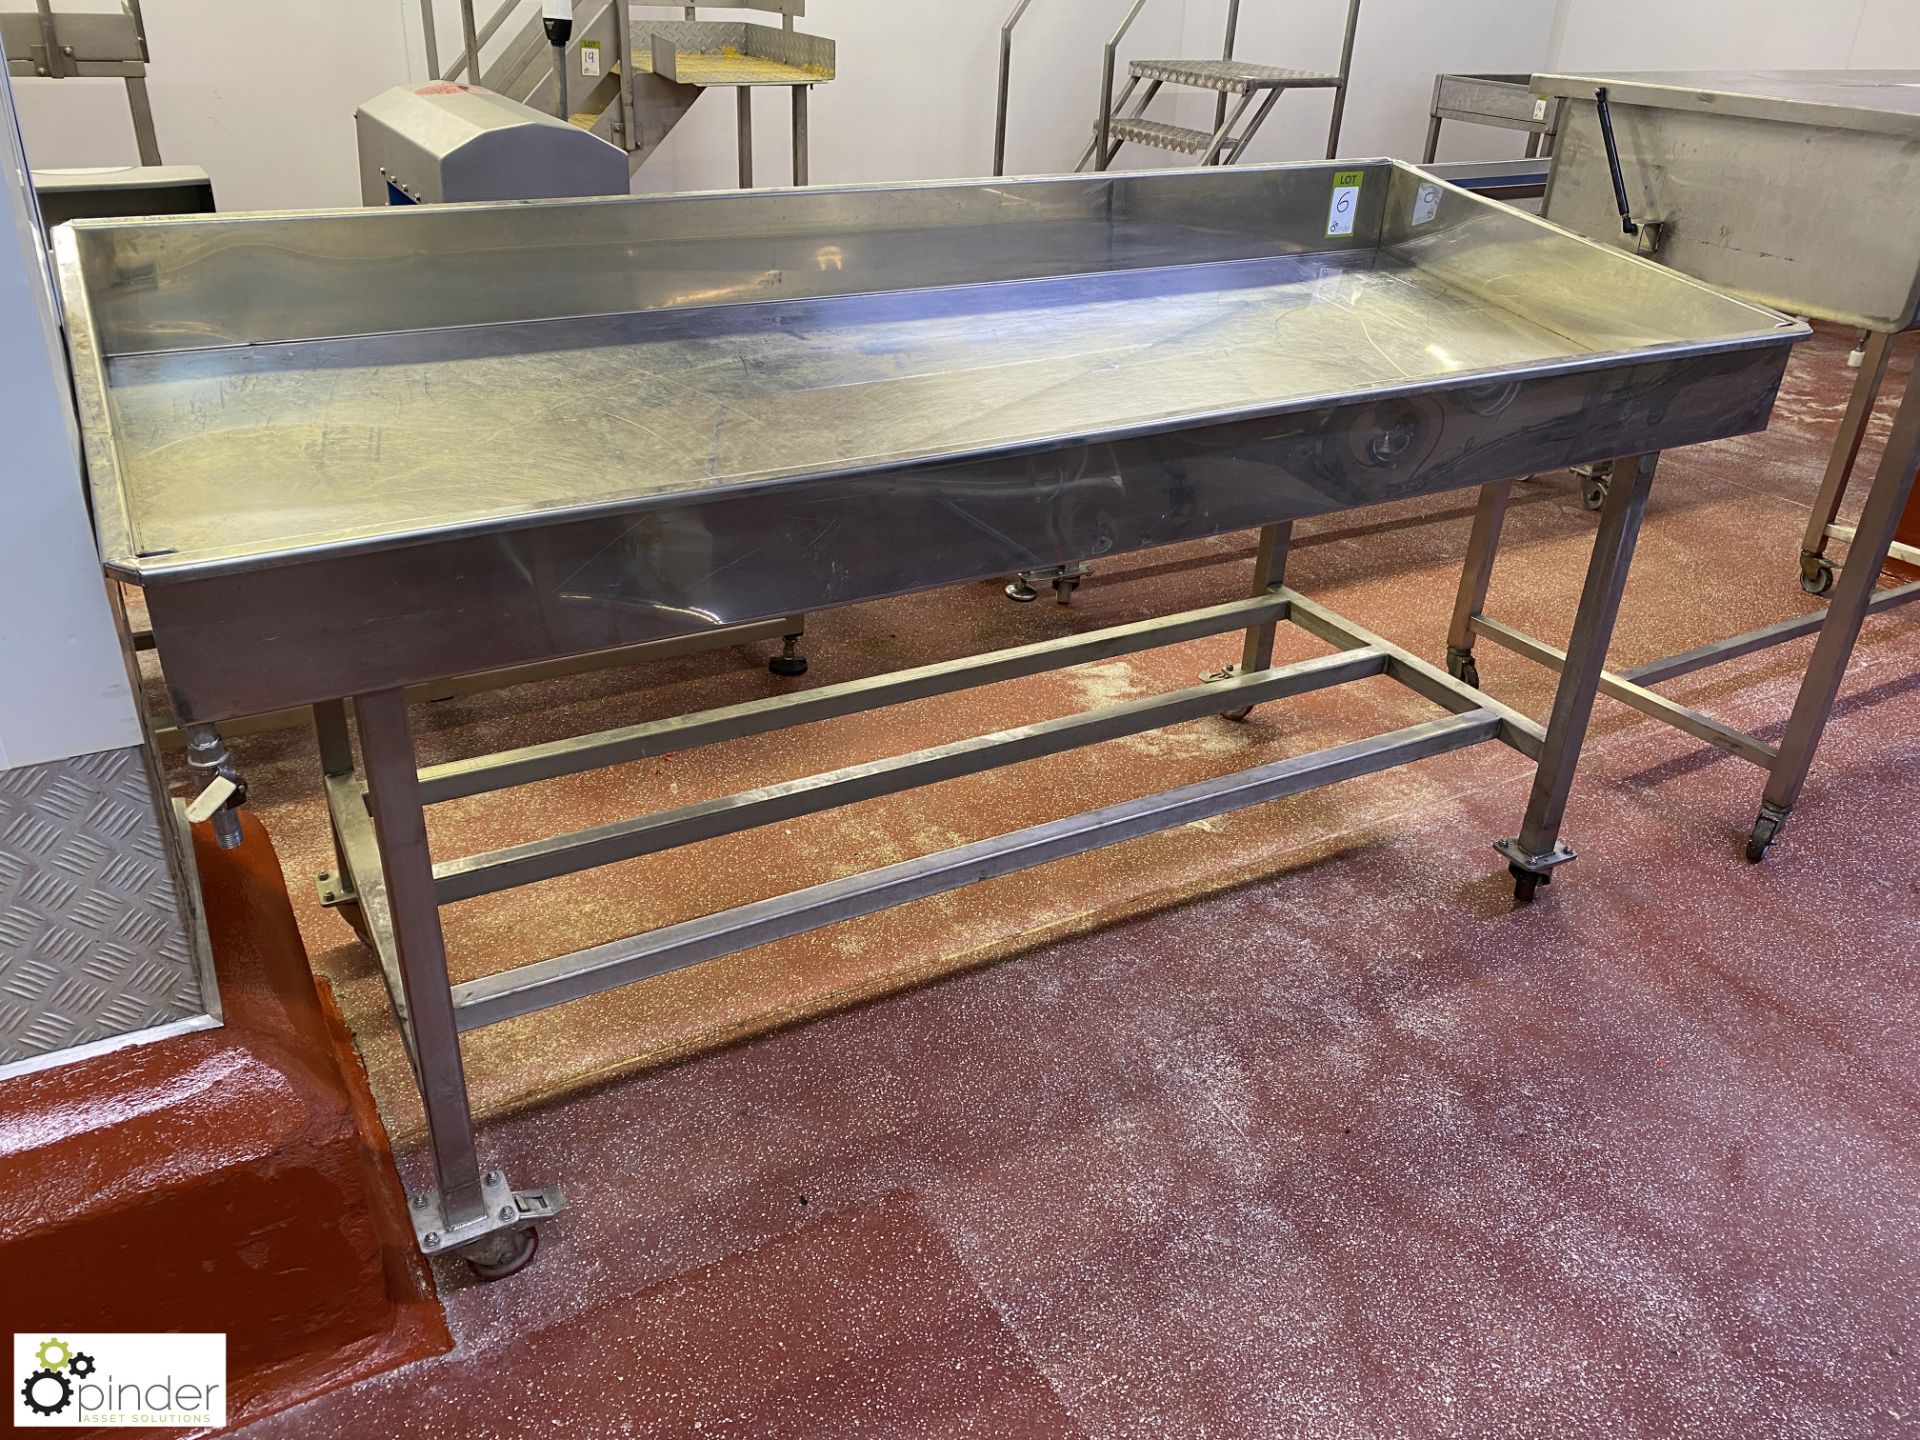 Stainless steel sloped mobile Gutting Table/Tank, 2050mm x 840mm x 950mm (Lift Out Fee: £10 plus